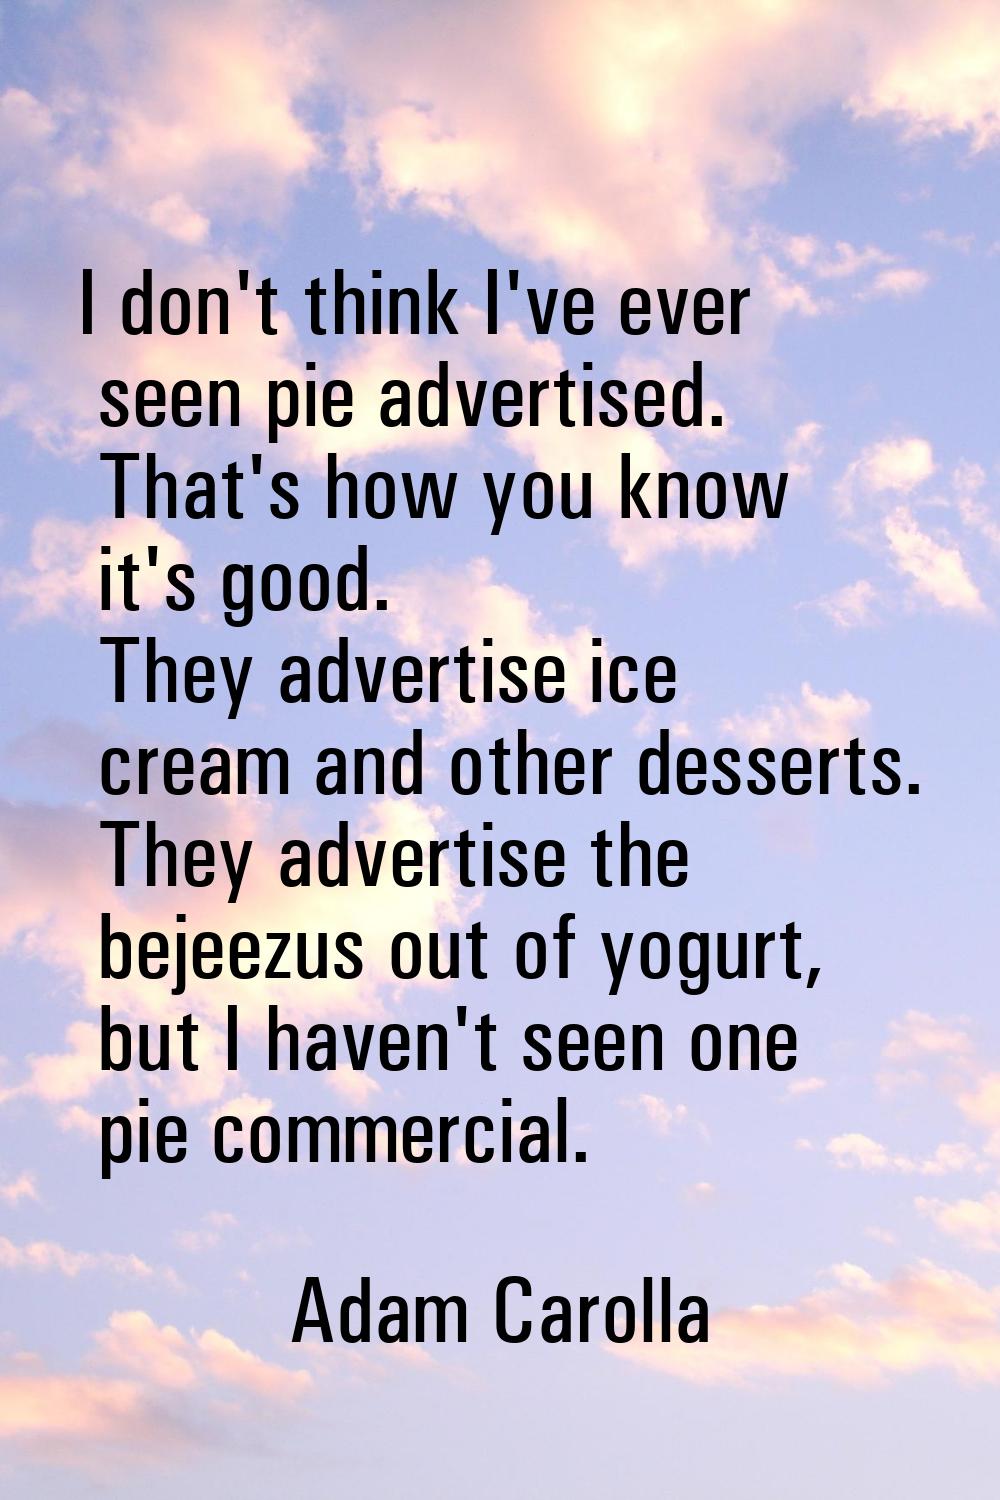 I don't think I've ever seen pie advertised. That's how you know it's good. They advertise ice crea